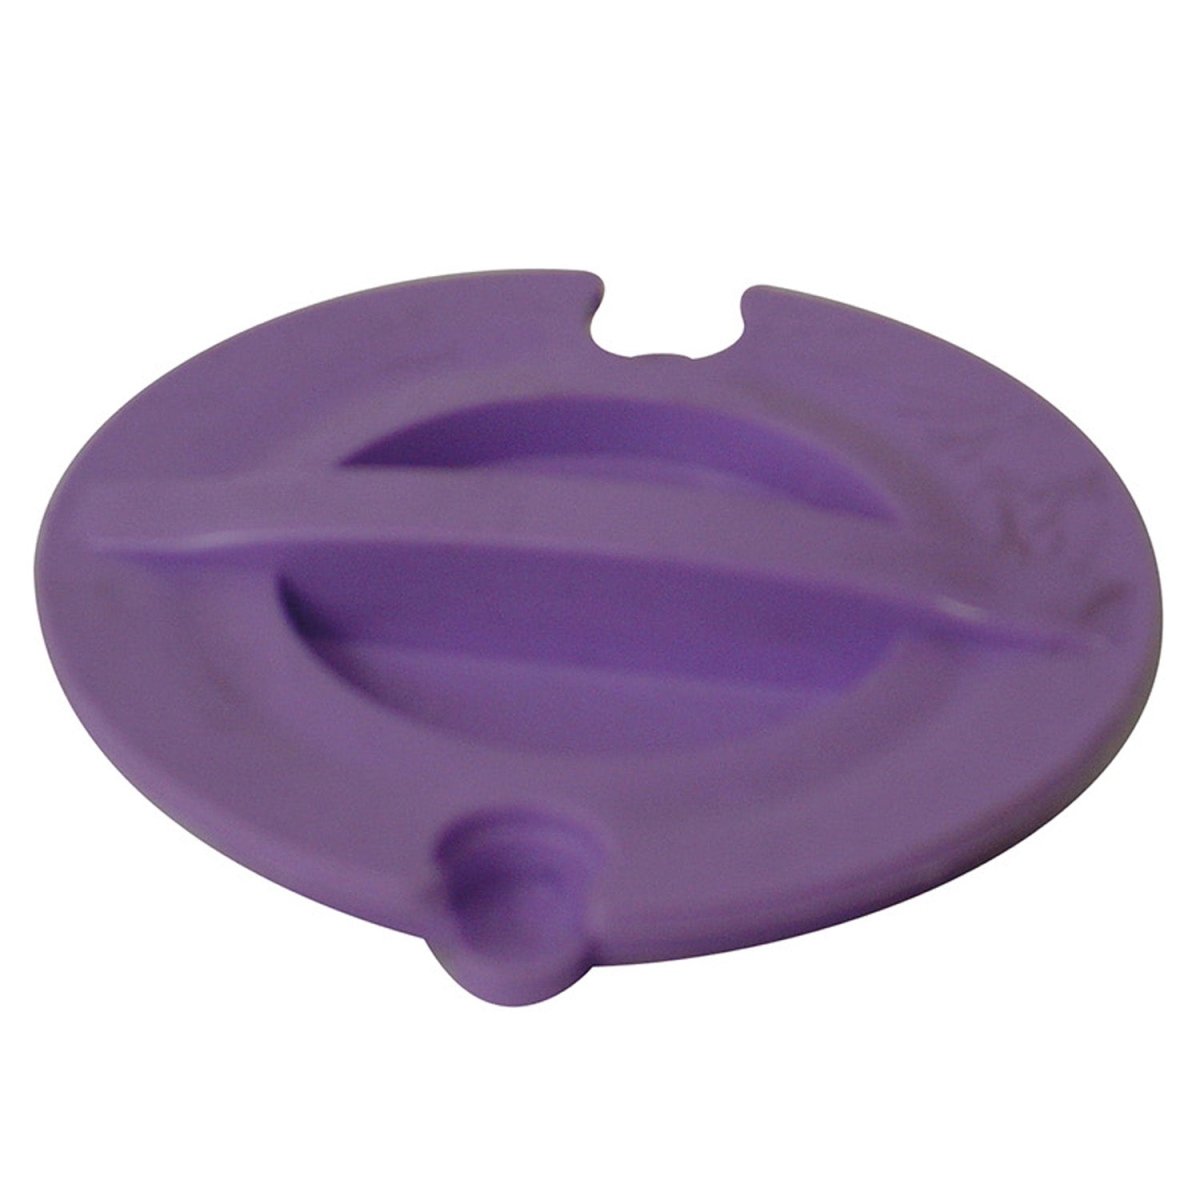 Likit Snak-A-Ball Spare Lid - Lilac -